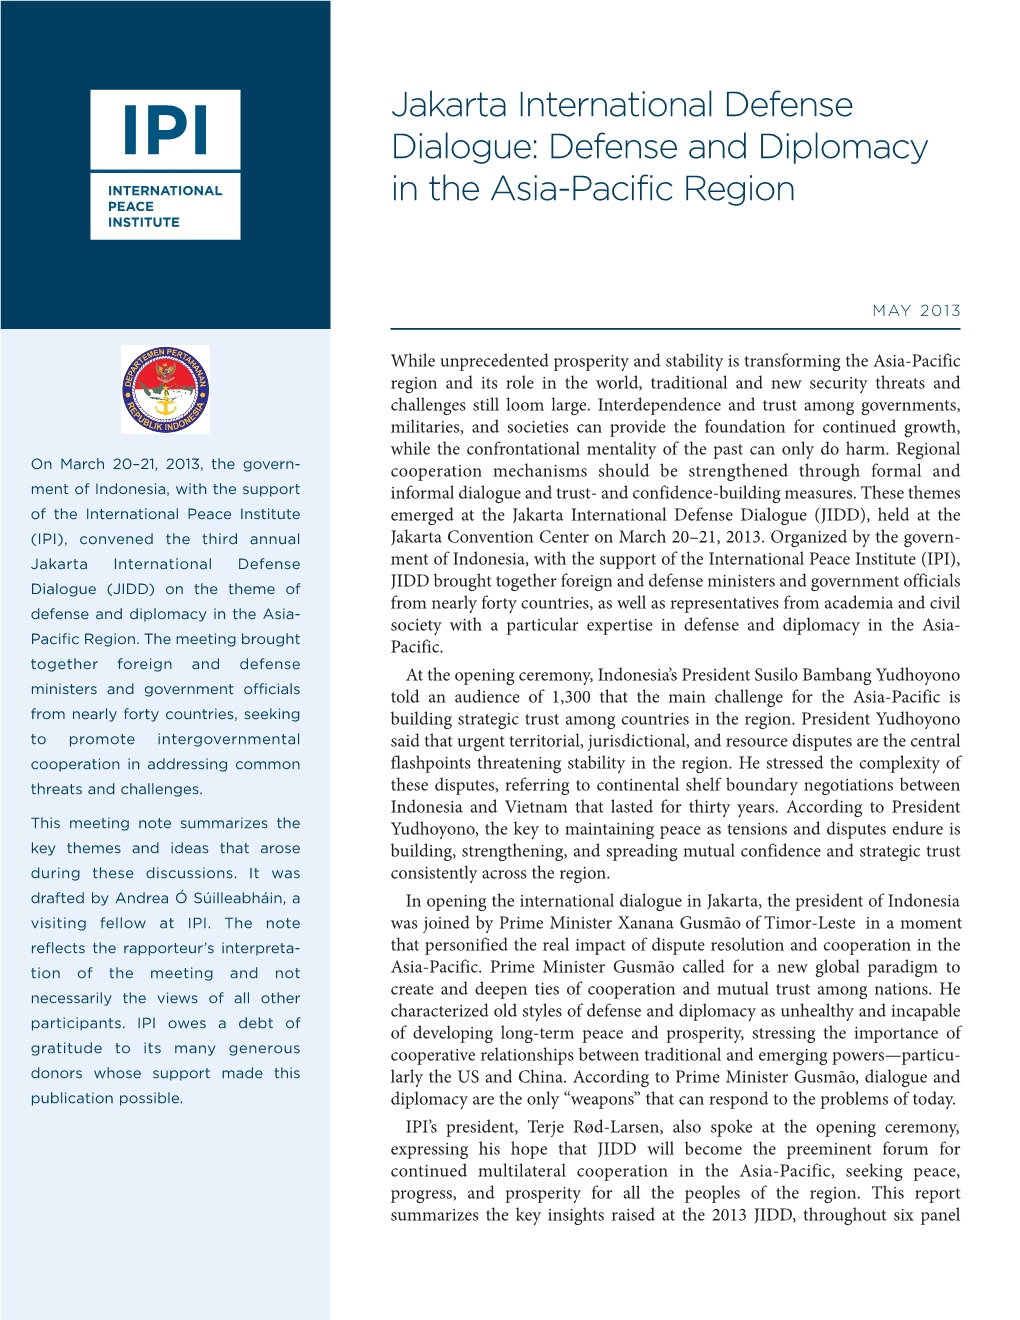 Defense and Diplomacy in the Asia-Pacific Region